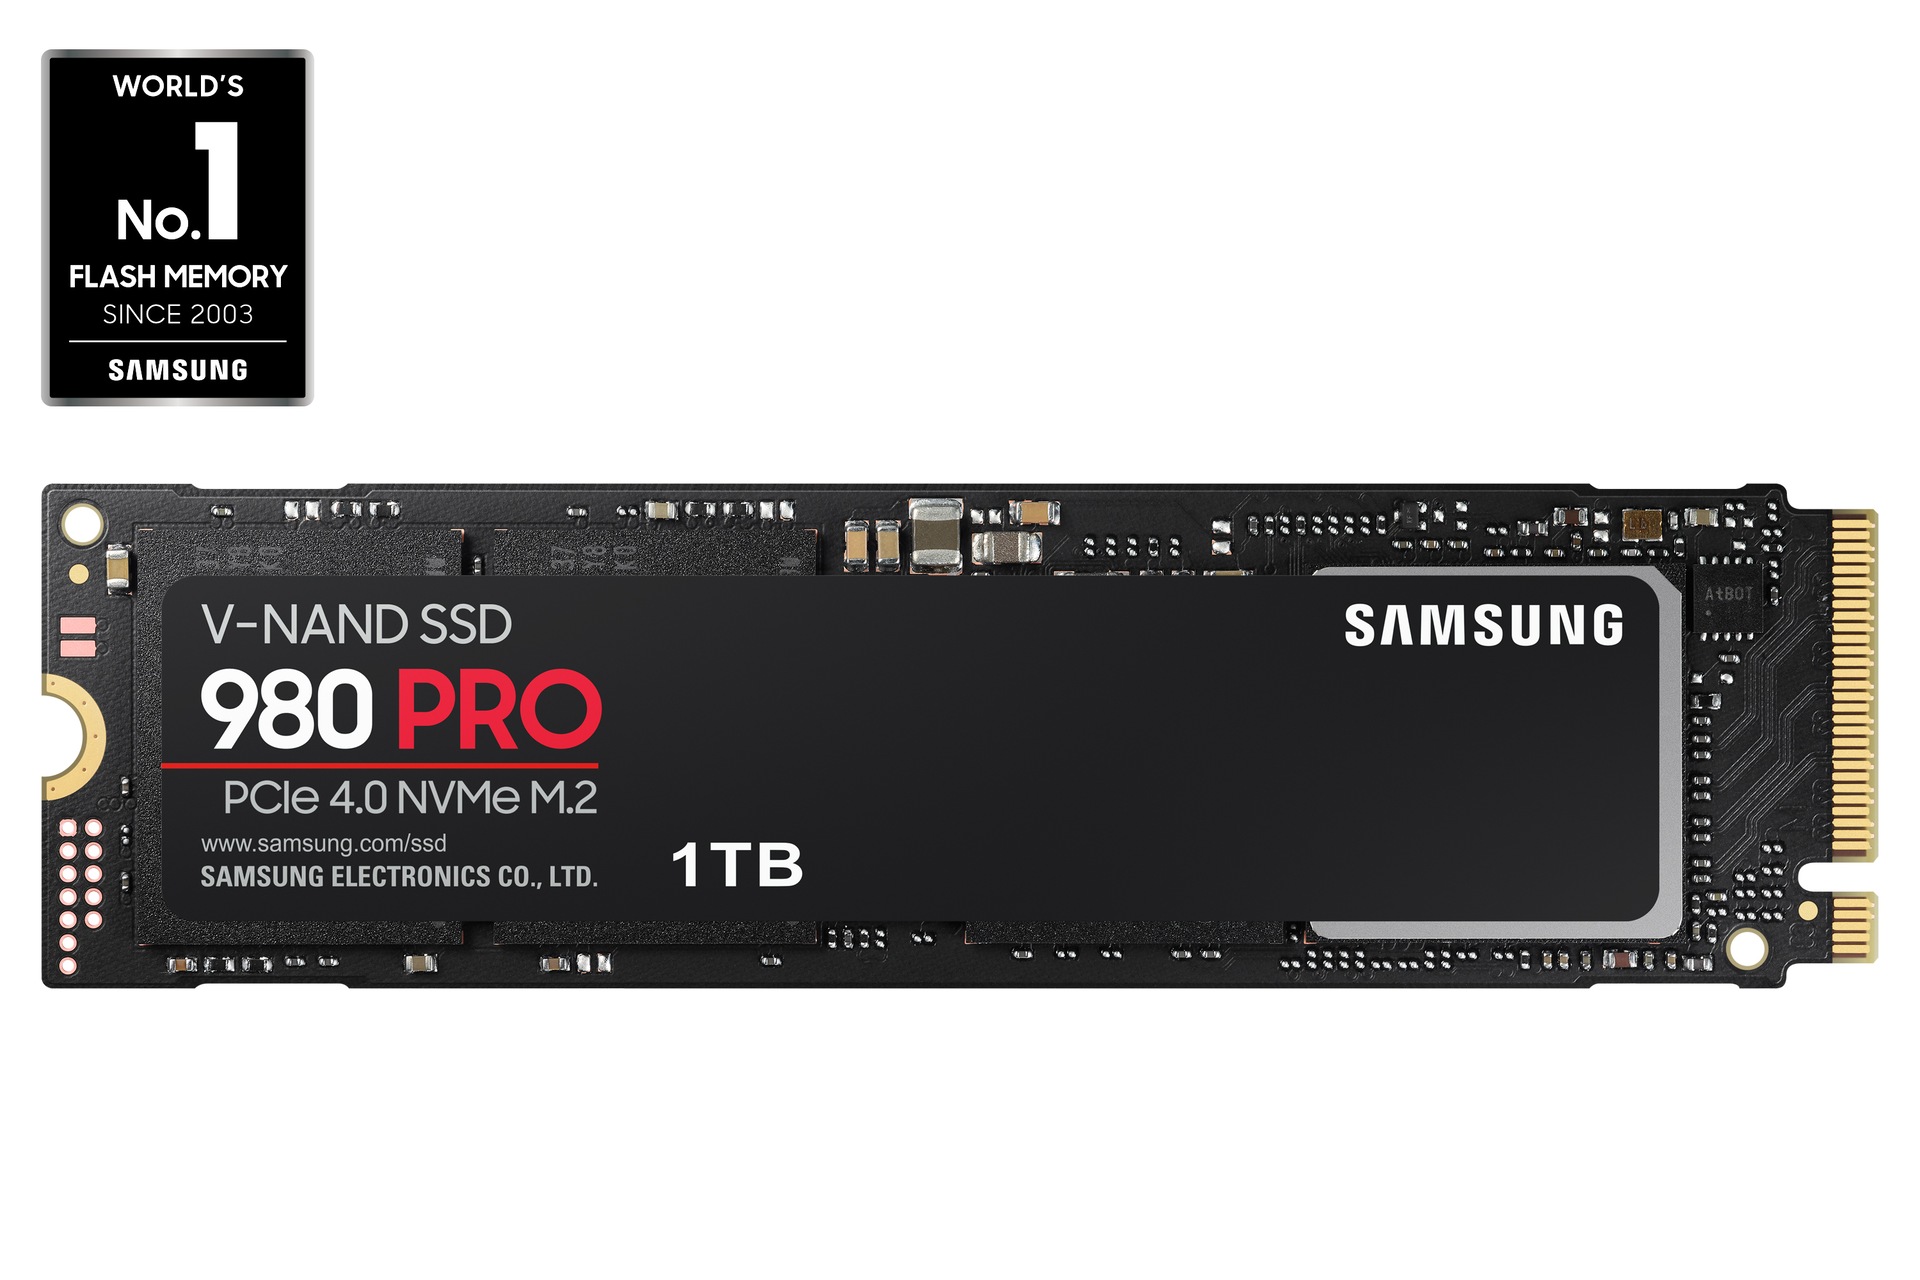 The Samsung 980 Pro 1TB and 2TB PCIe NVMe Gen4 SSDs available at